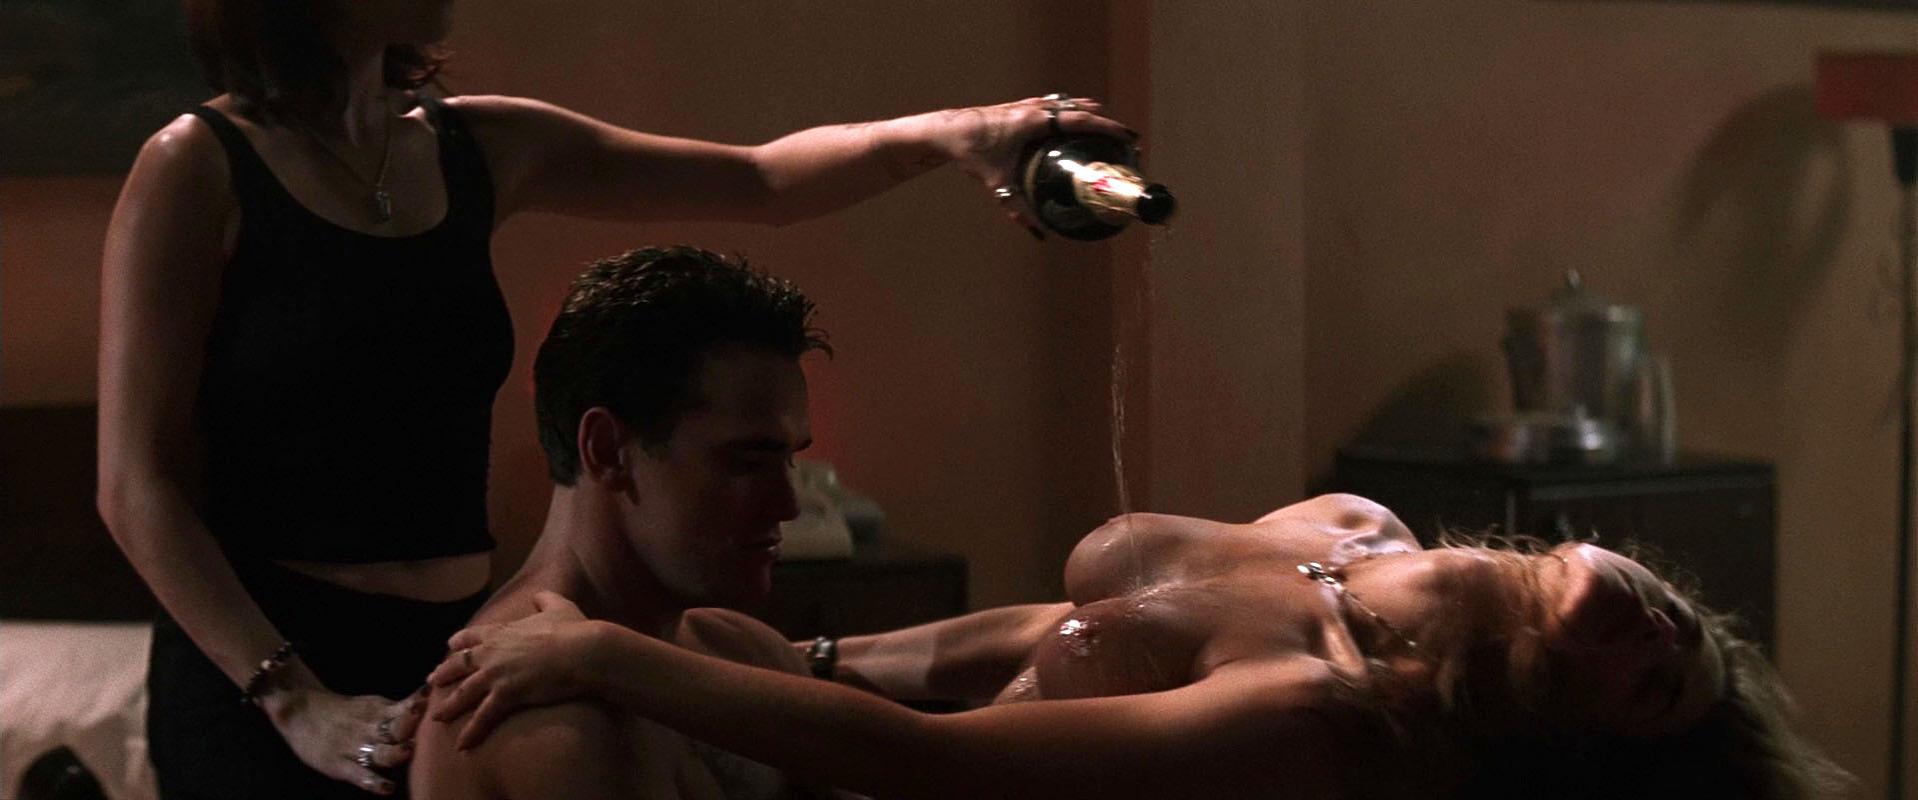 Denise Richards in nude scene from Wild Things which was released in 1998. 